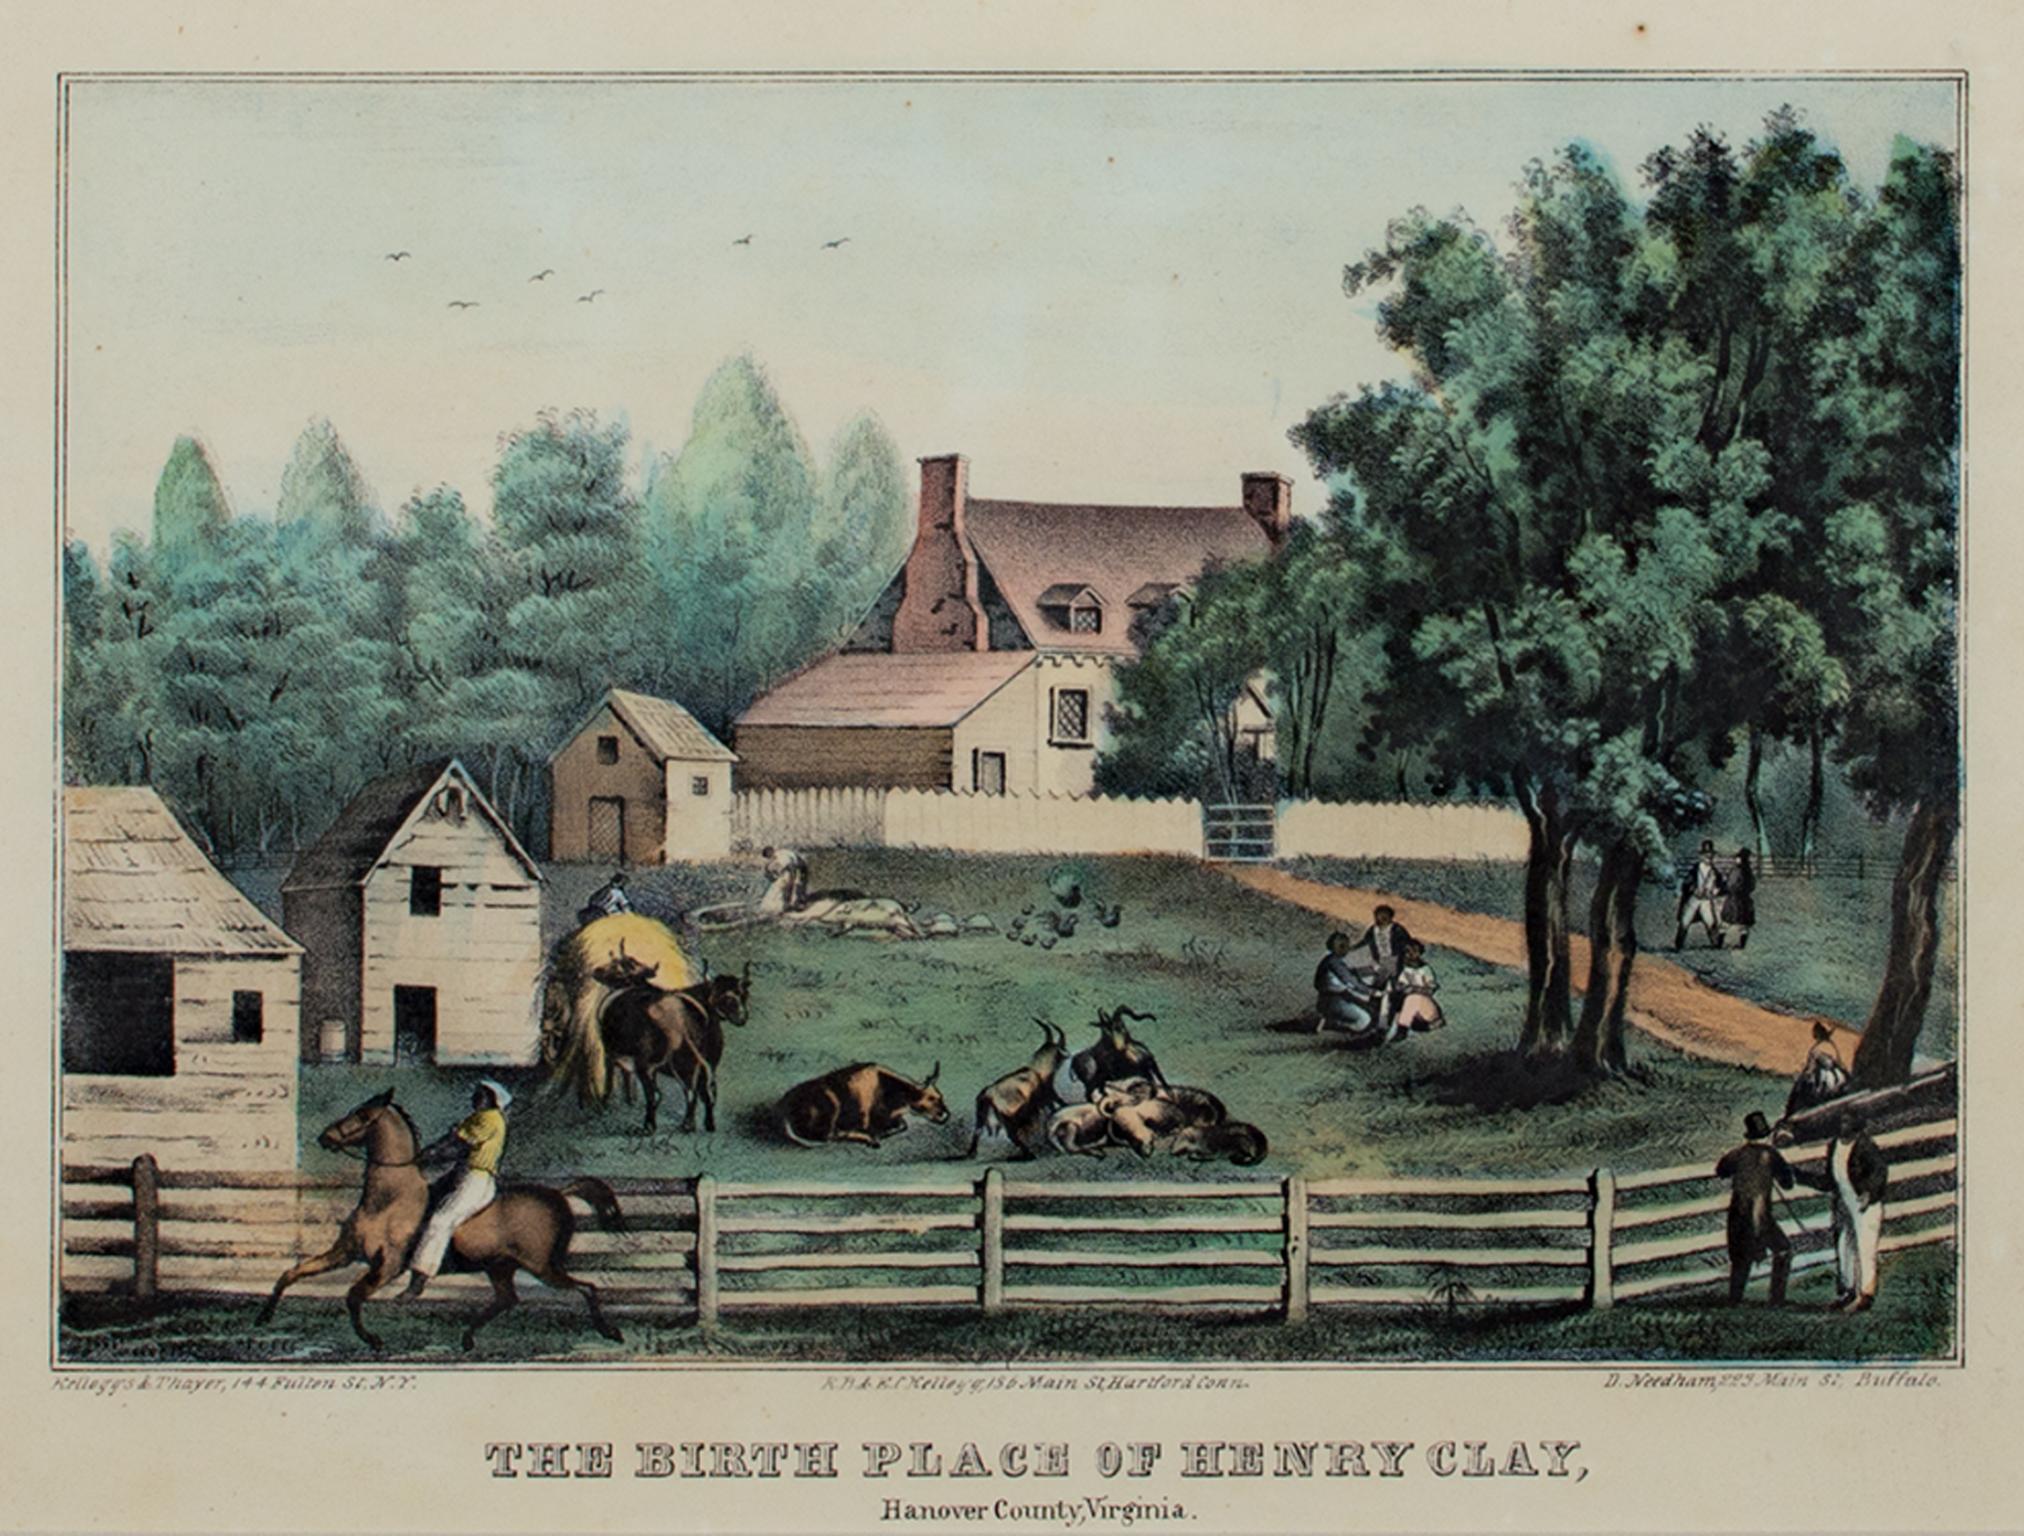 "Birthplace of Henry Clay, Hanover County, VA, " Lithograph by Kelloggs & Thayer